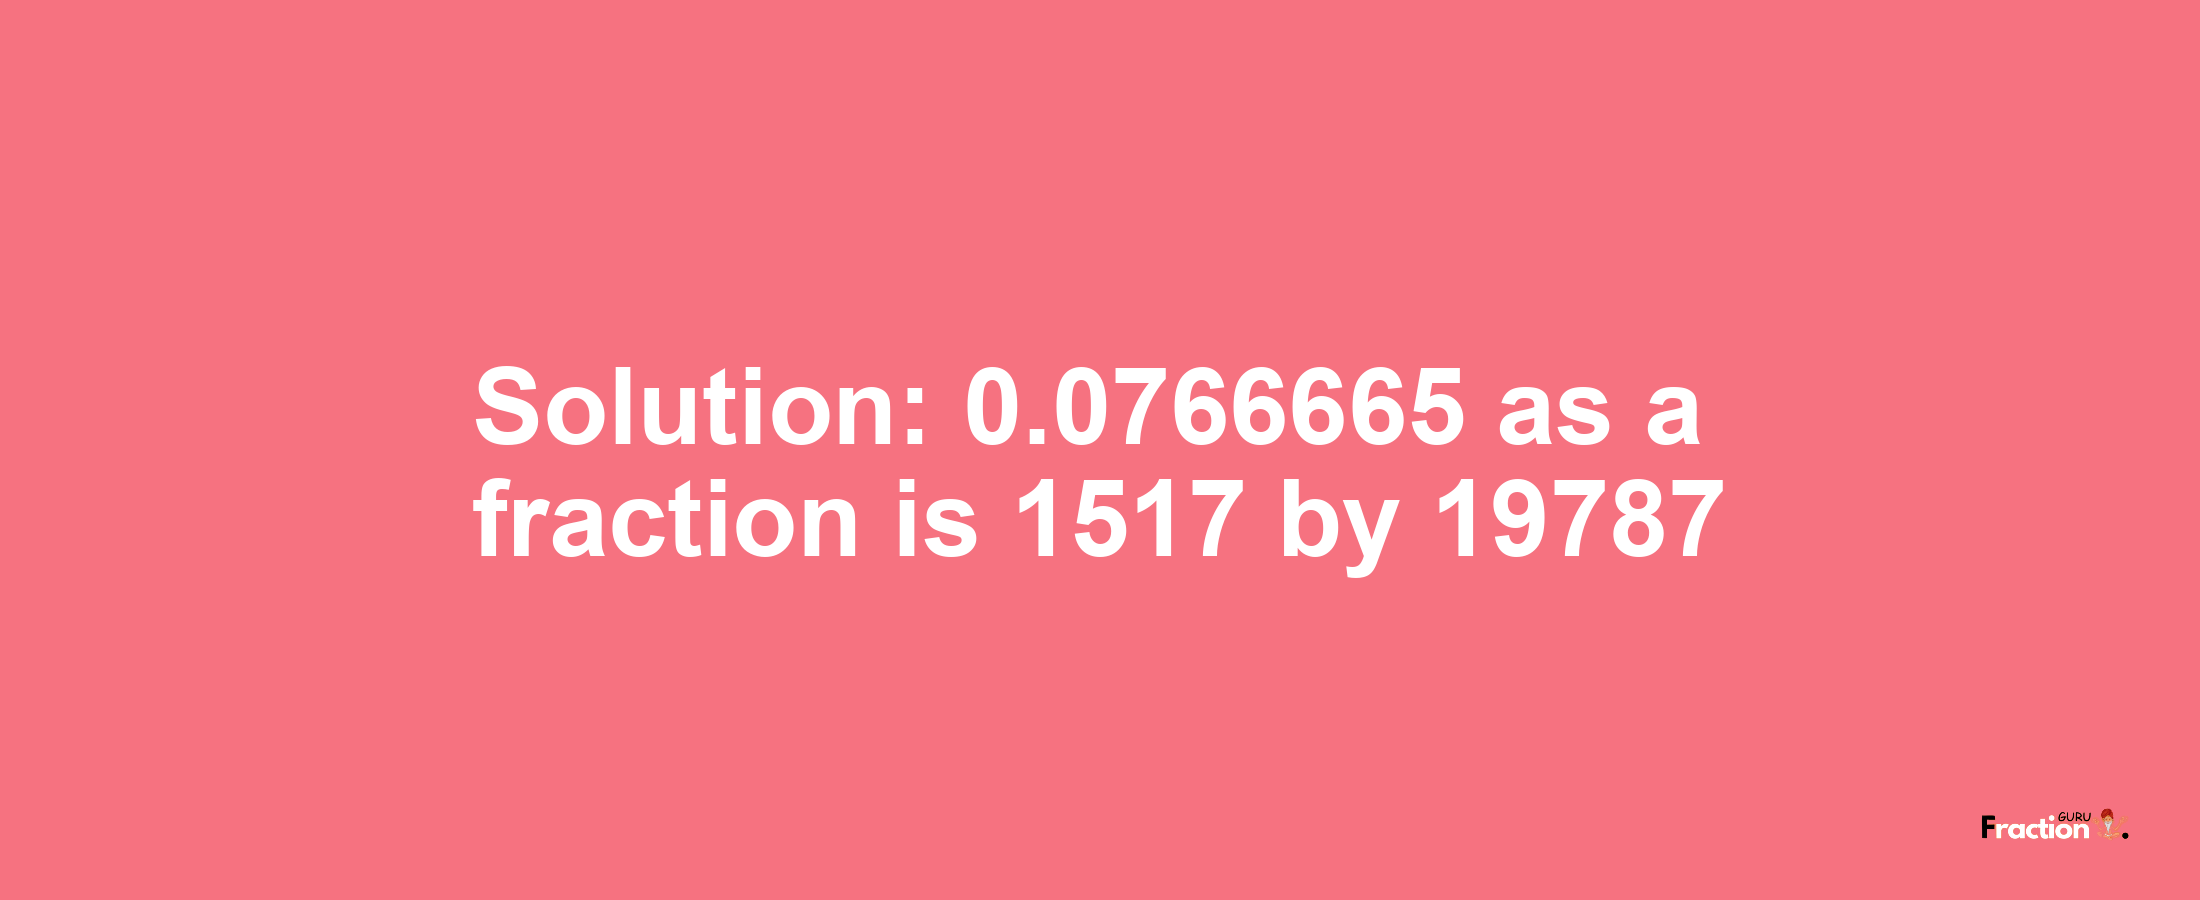 Solution:0.0766665 as a fraction is 1517/19787